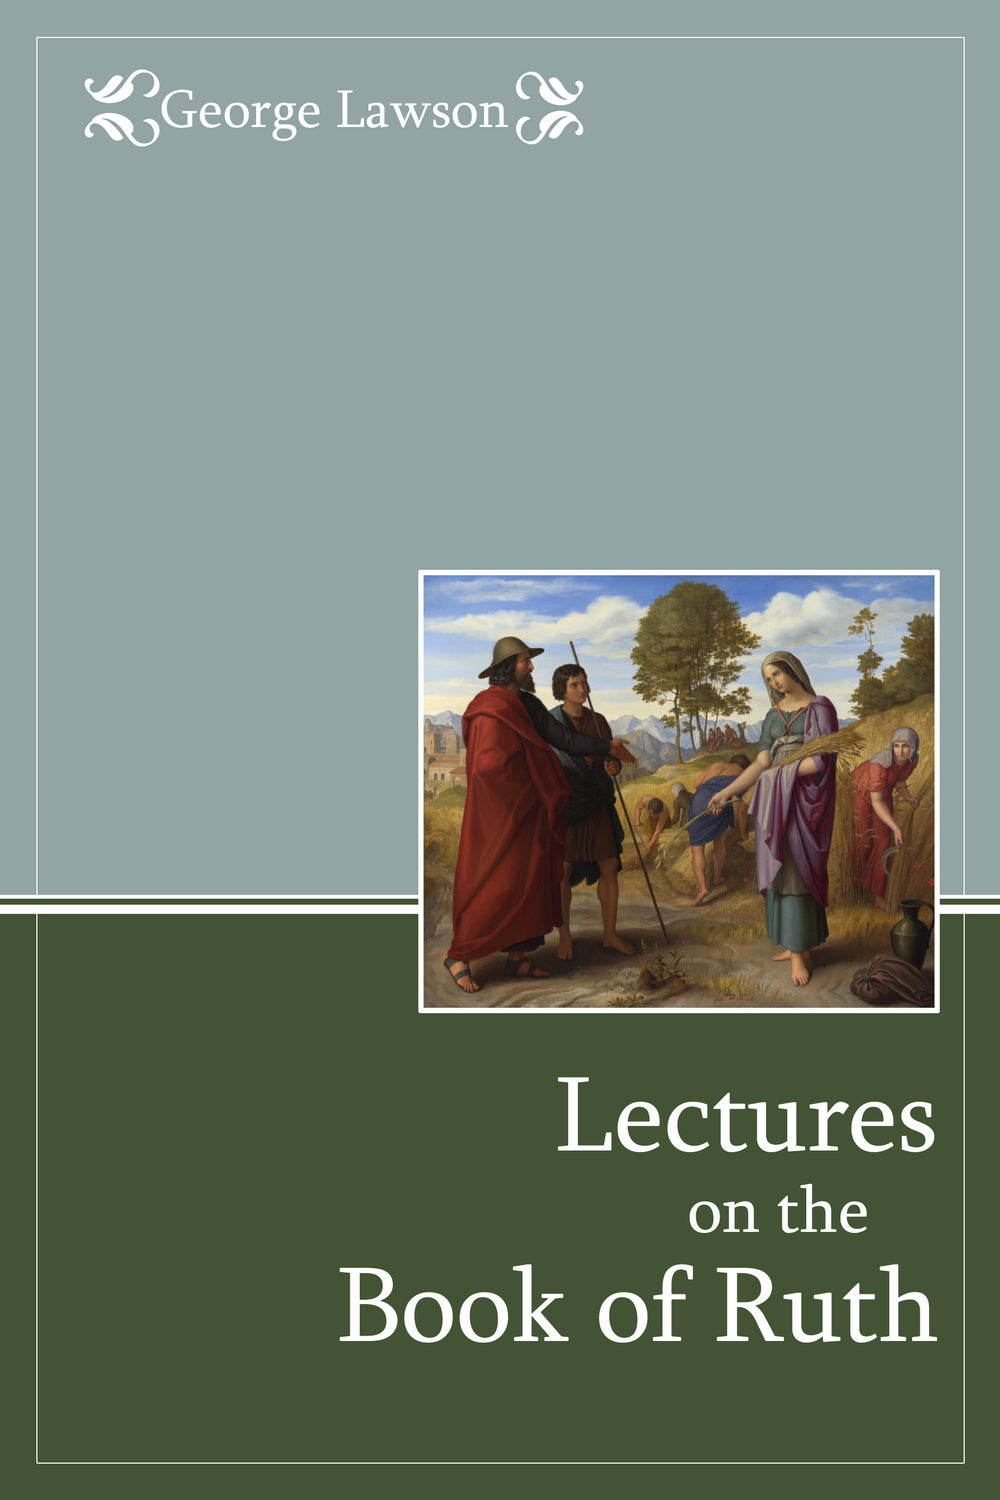 Lectures on the book of Ruth